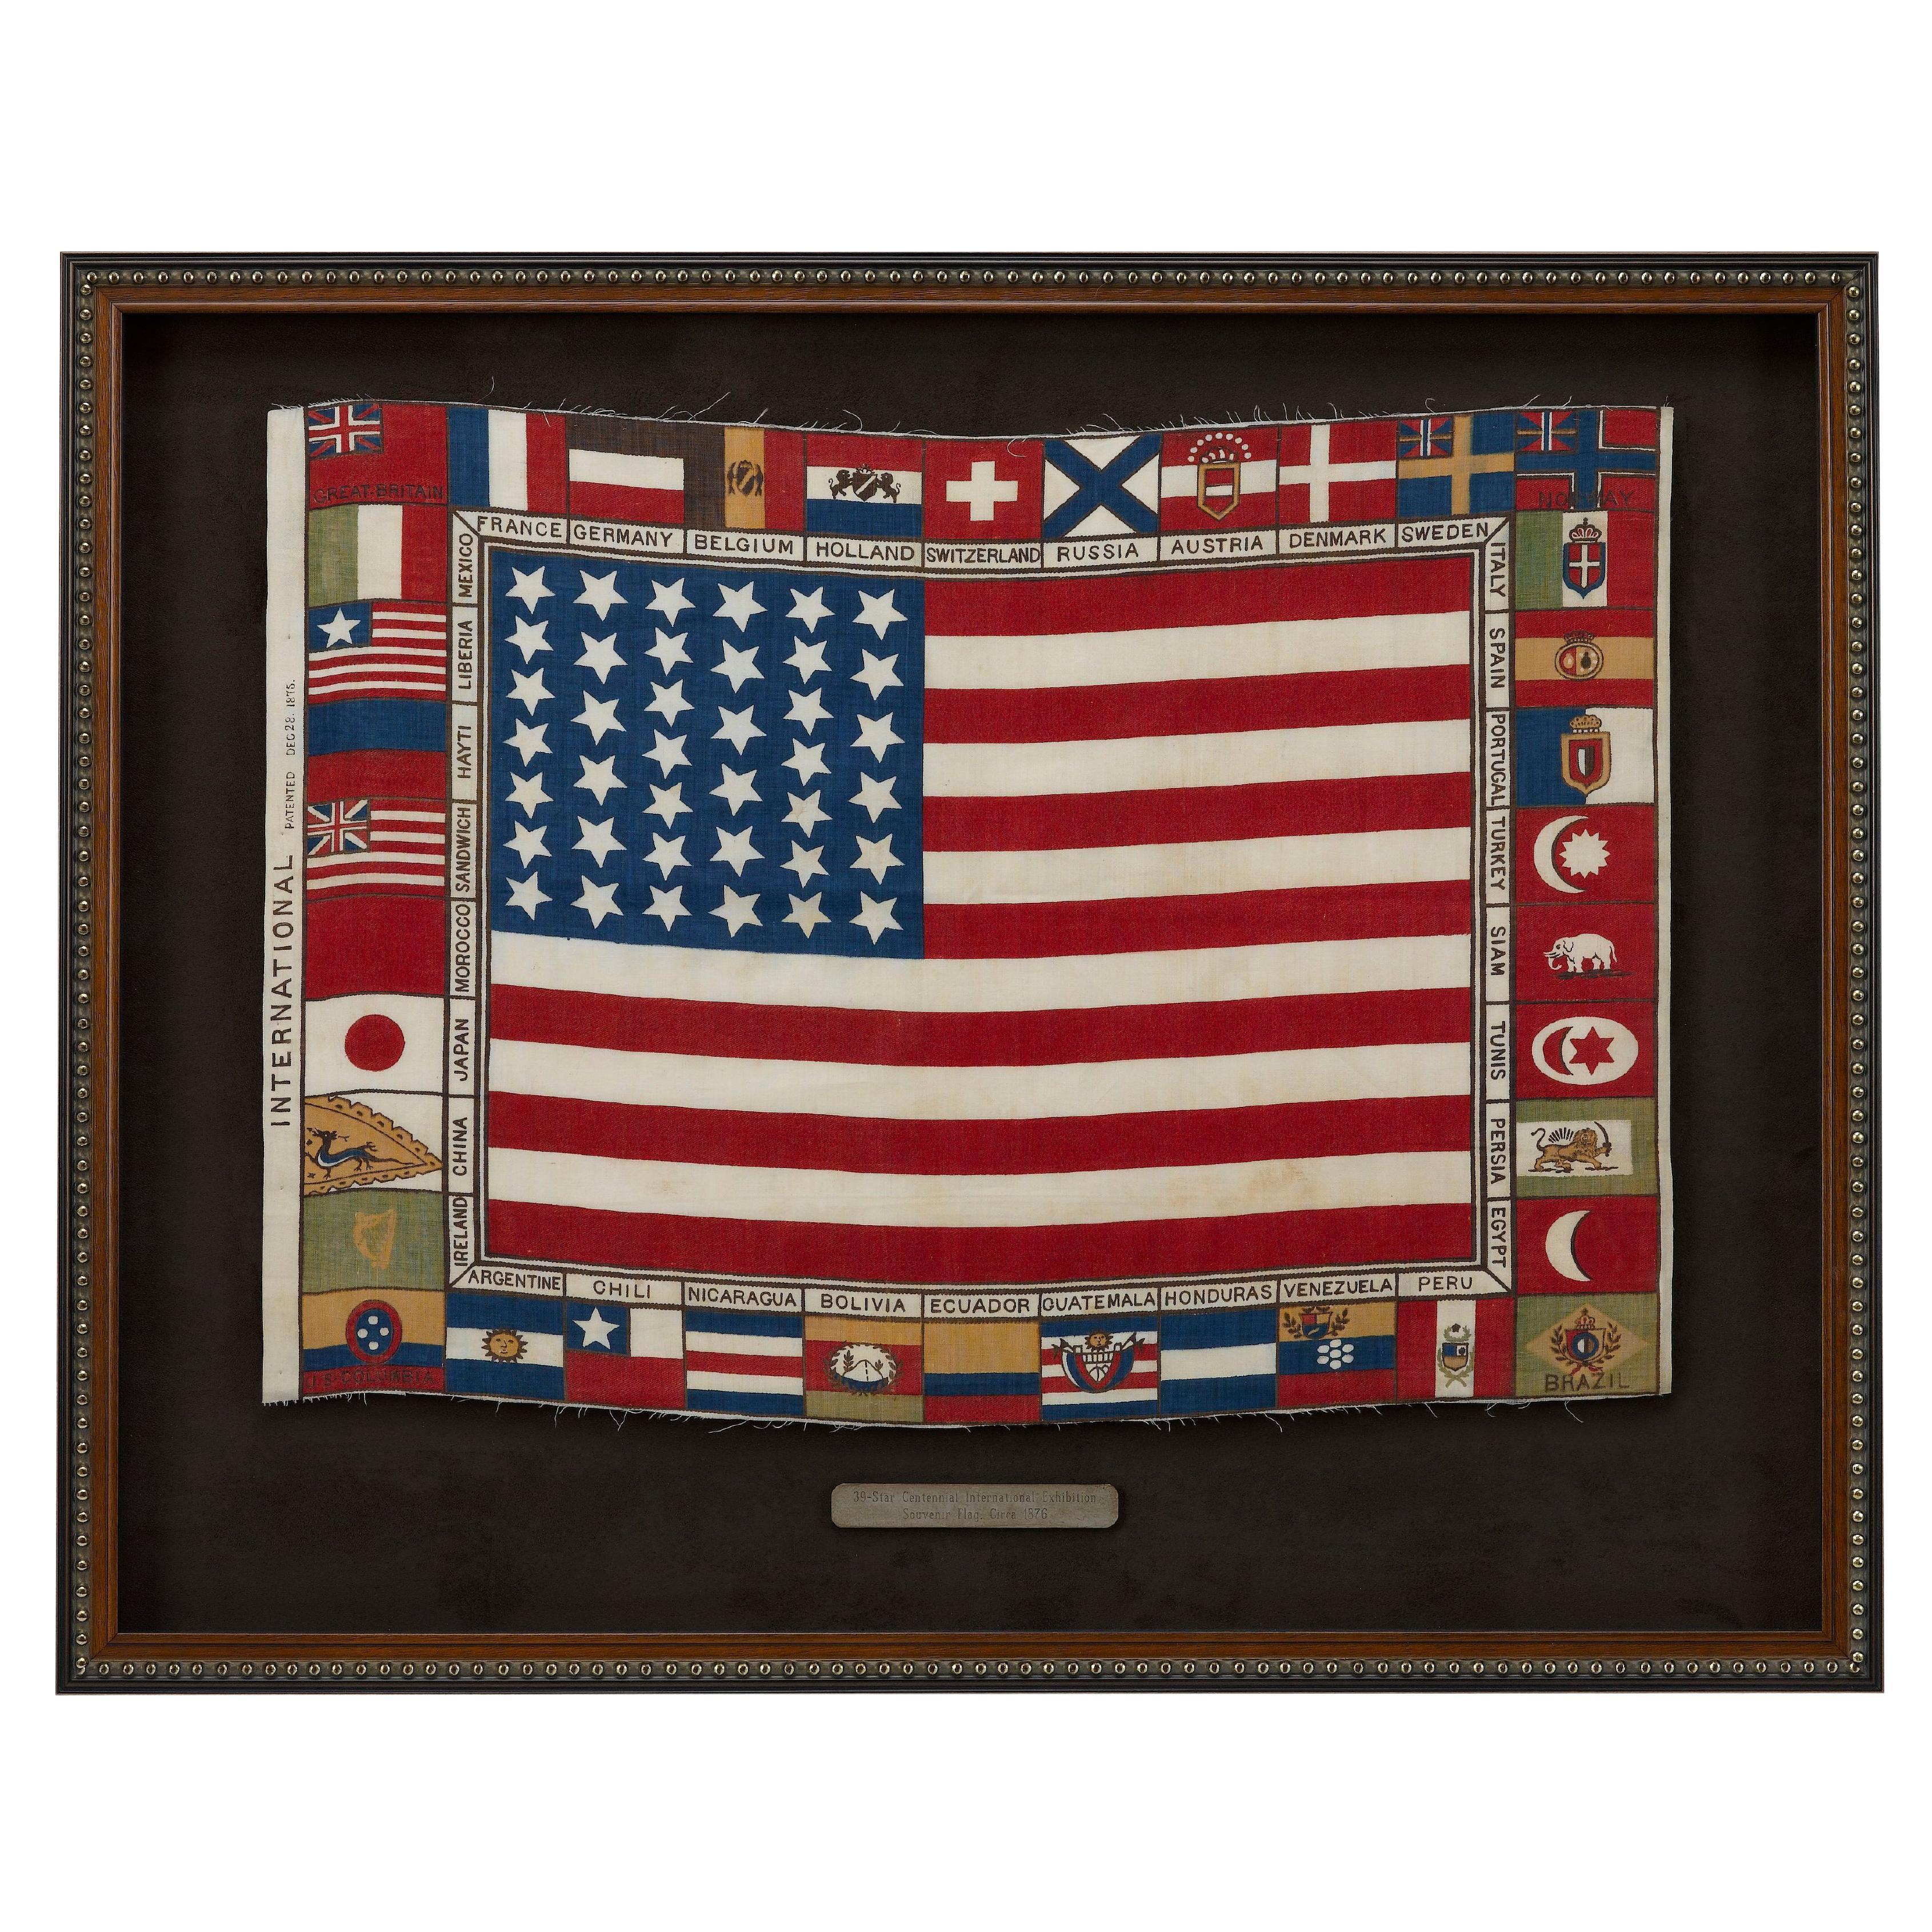 42 Stars, an Unofficial Star Count on an Antique American Flag ...